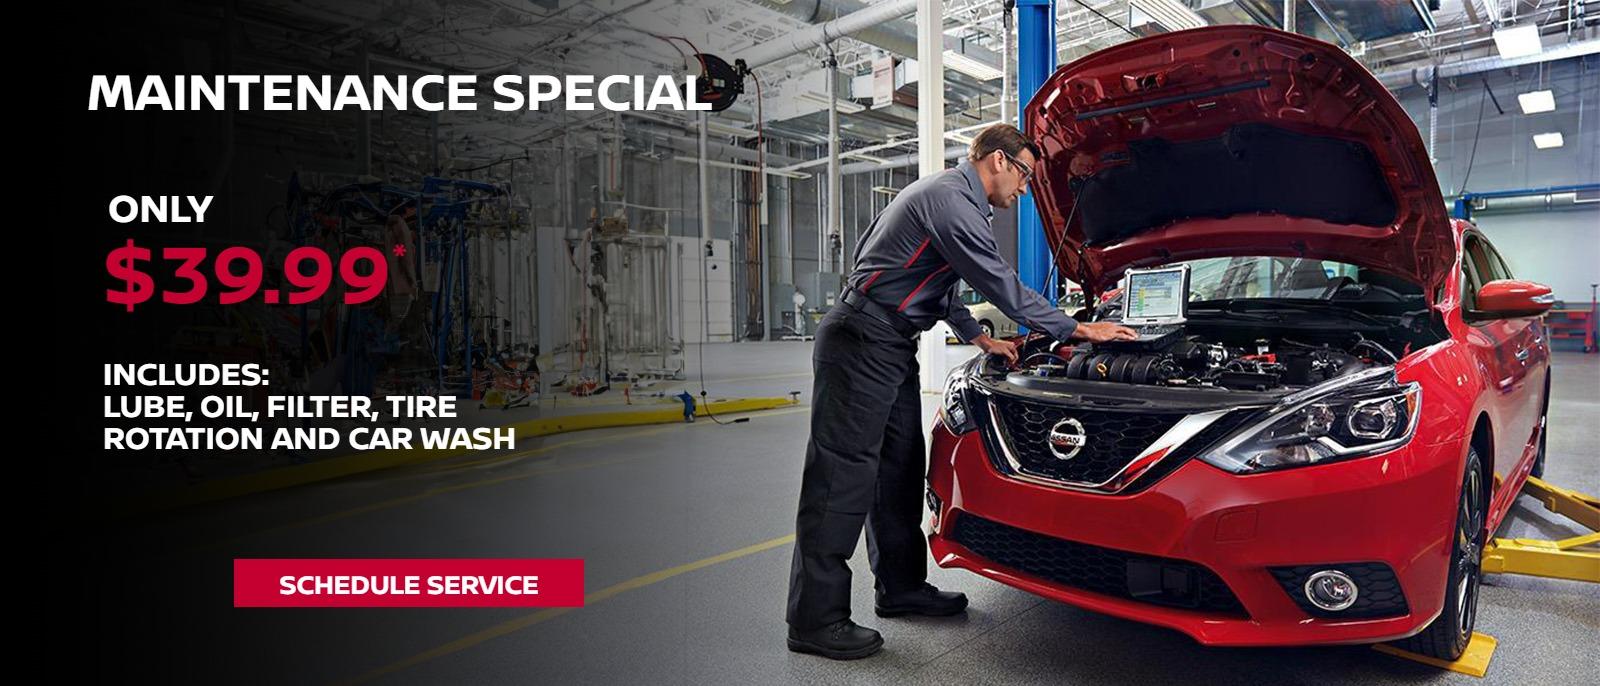 MAINTENANCE SPECIAL
ONLY $39.99*
Includes:
Lube, Oil, Filter, Tire Rotation and Car Wash